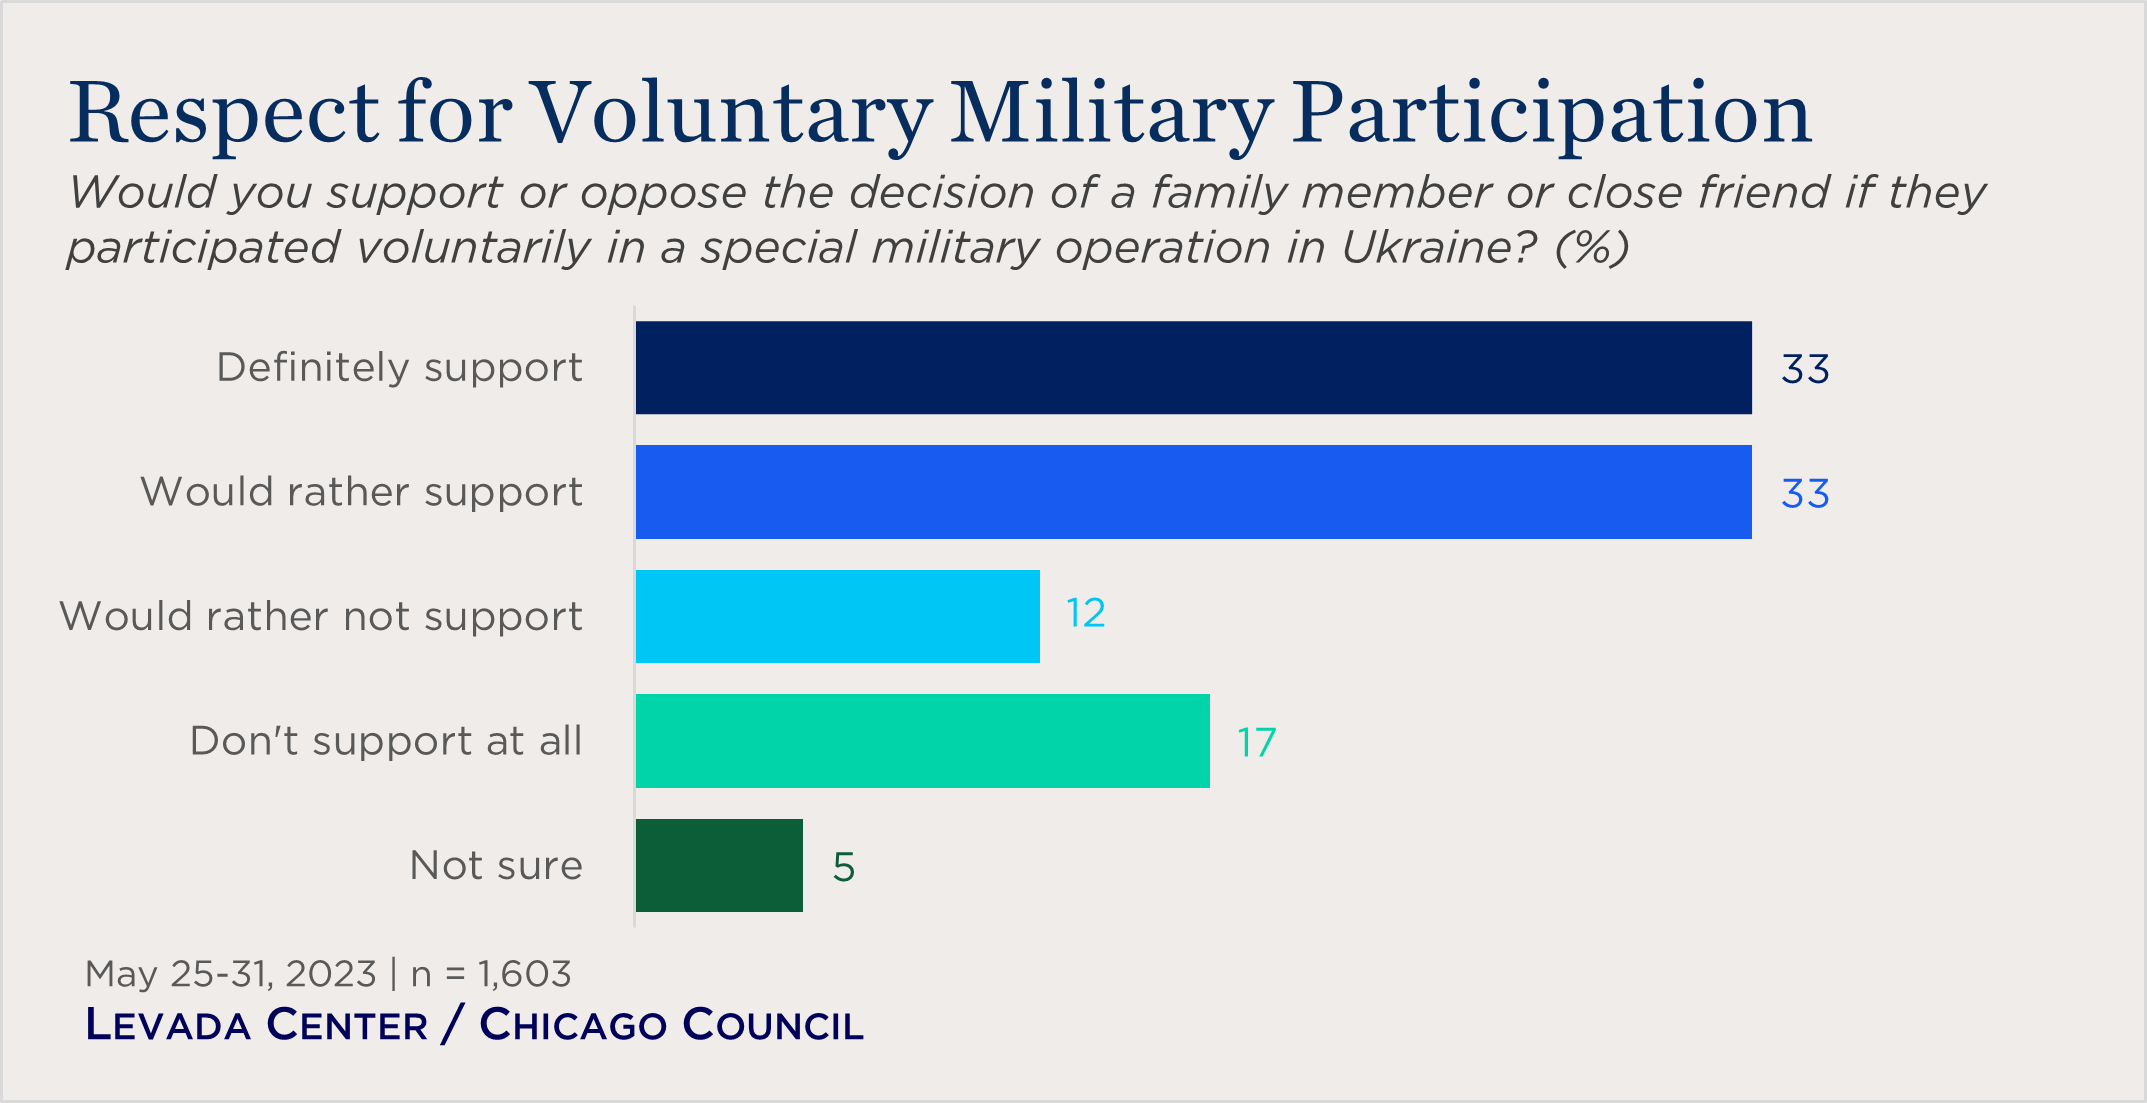 bar chart showing respect for voluntary military participation